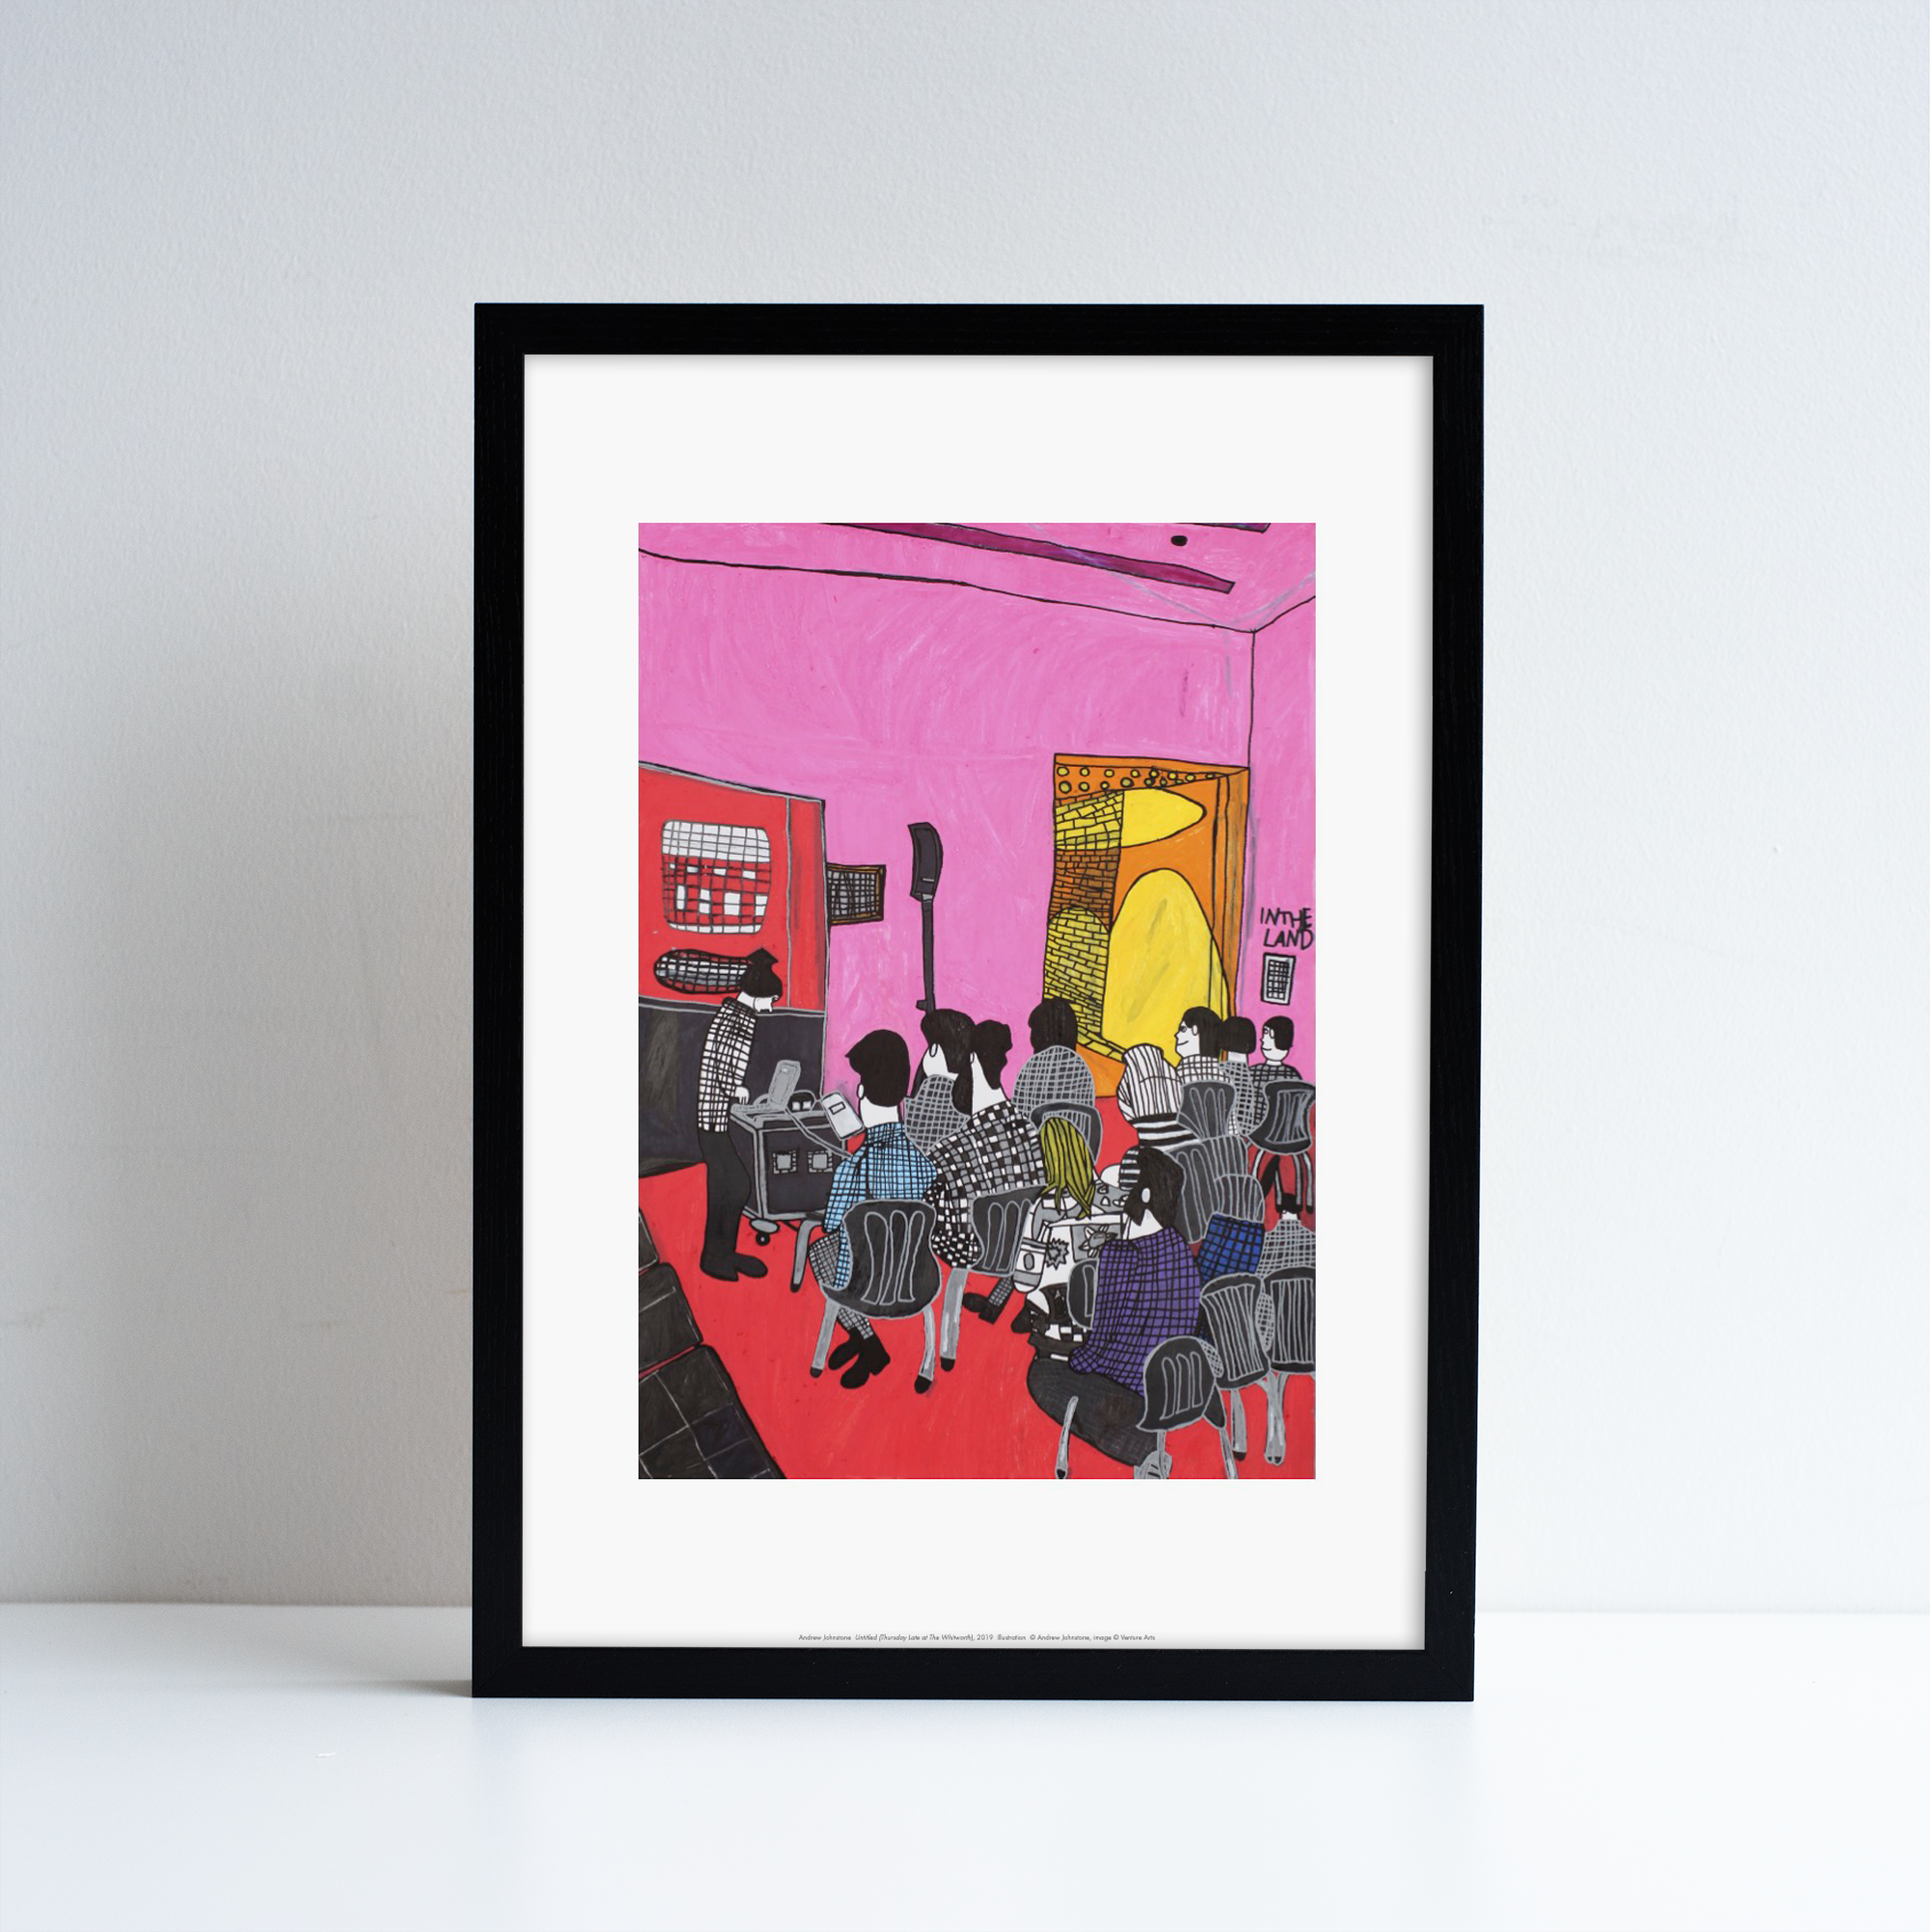 Framed reproduction of Andrew Johnstones artwork. A room full of people sat on chairs with pink walls.